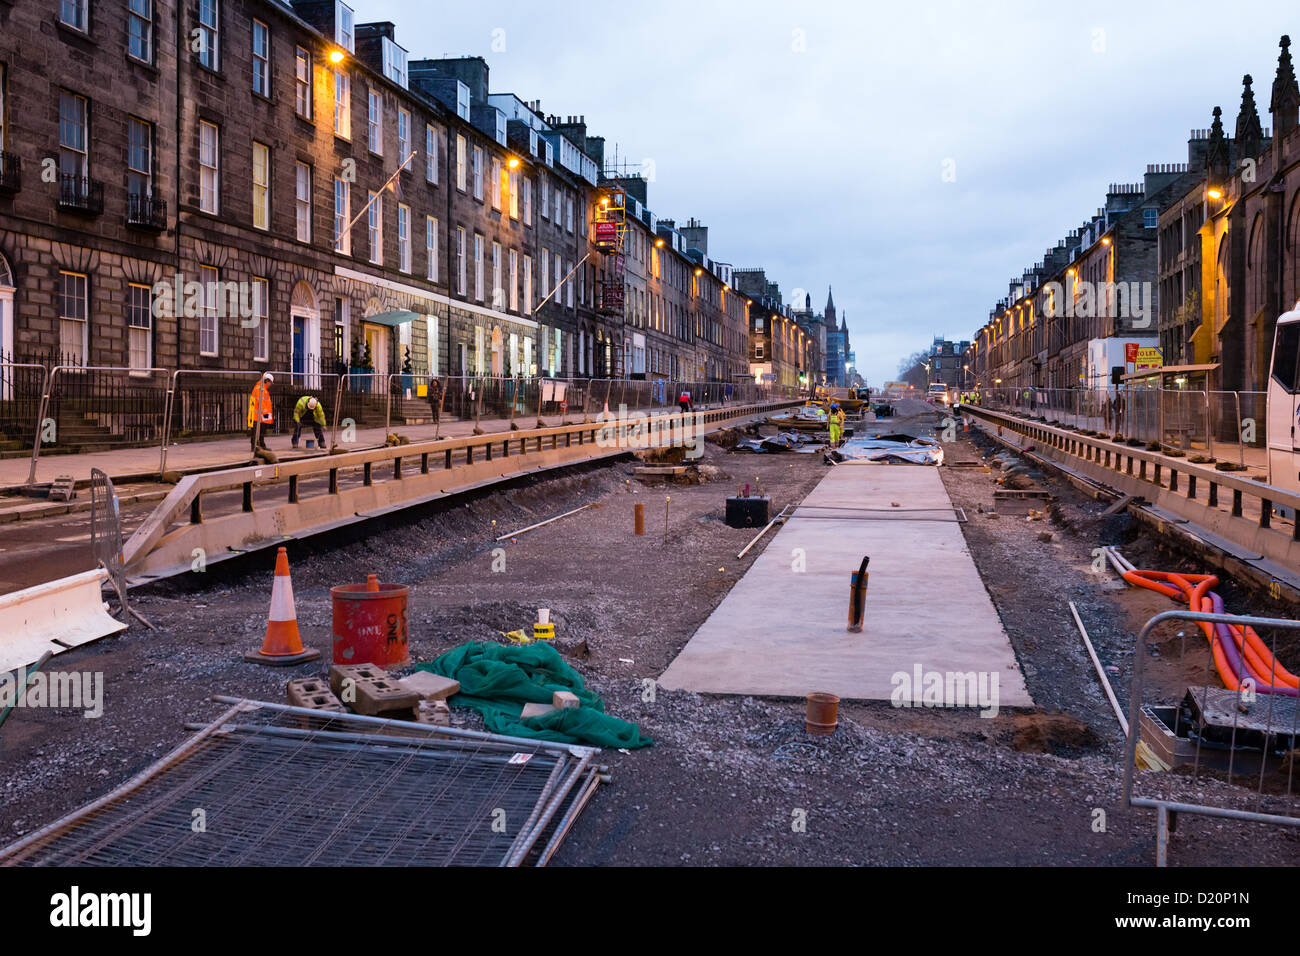 Edinburgh, midwinter - work continues on the new tram system. Queen Street. Stock Photo